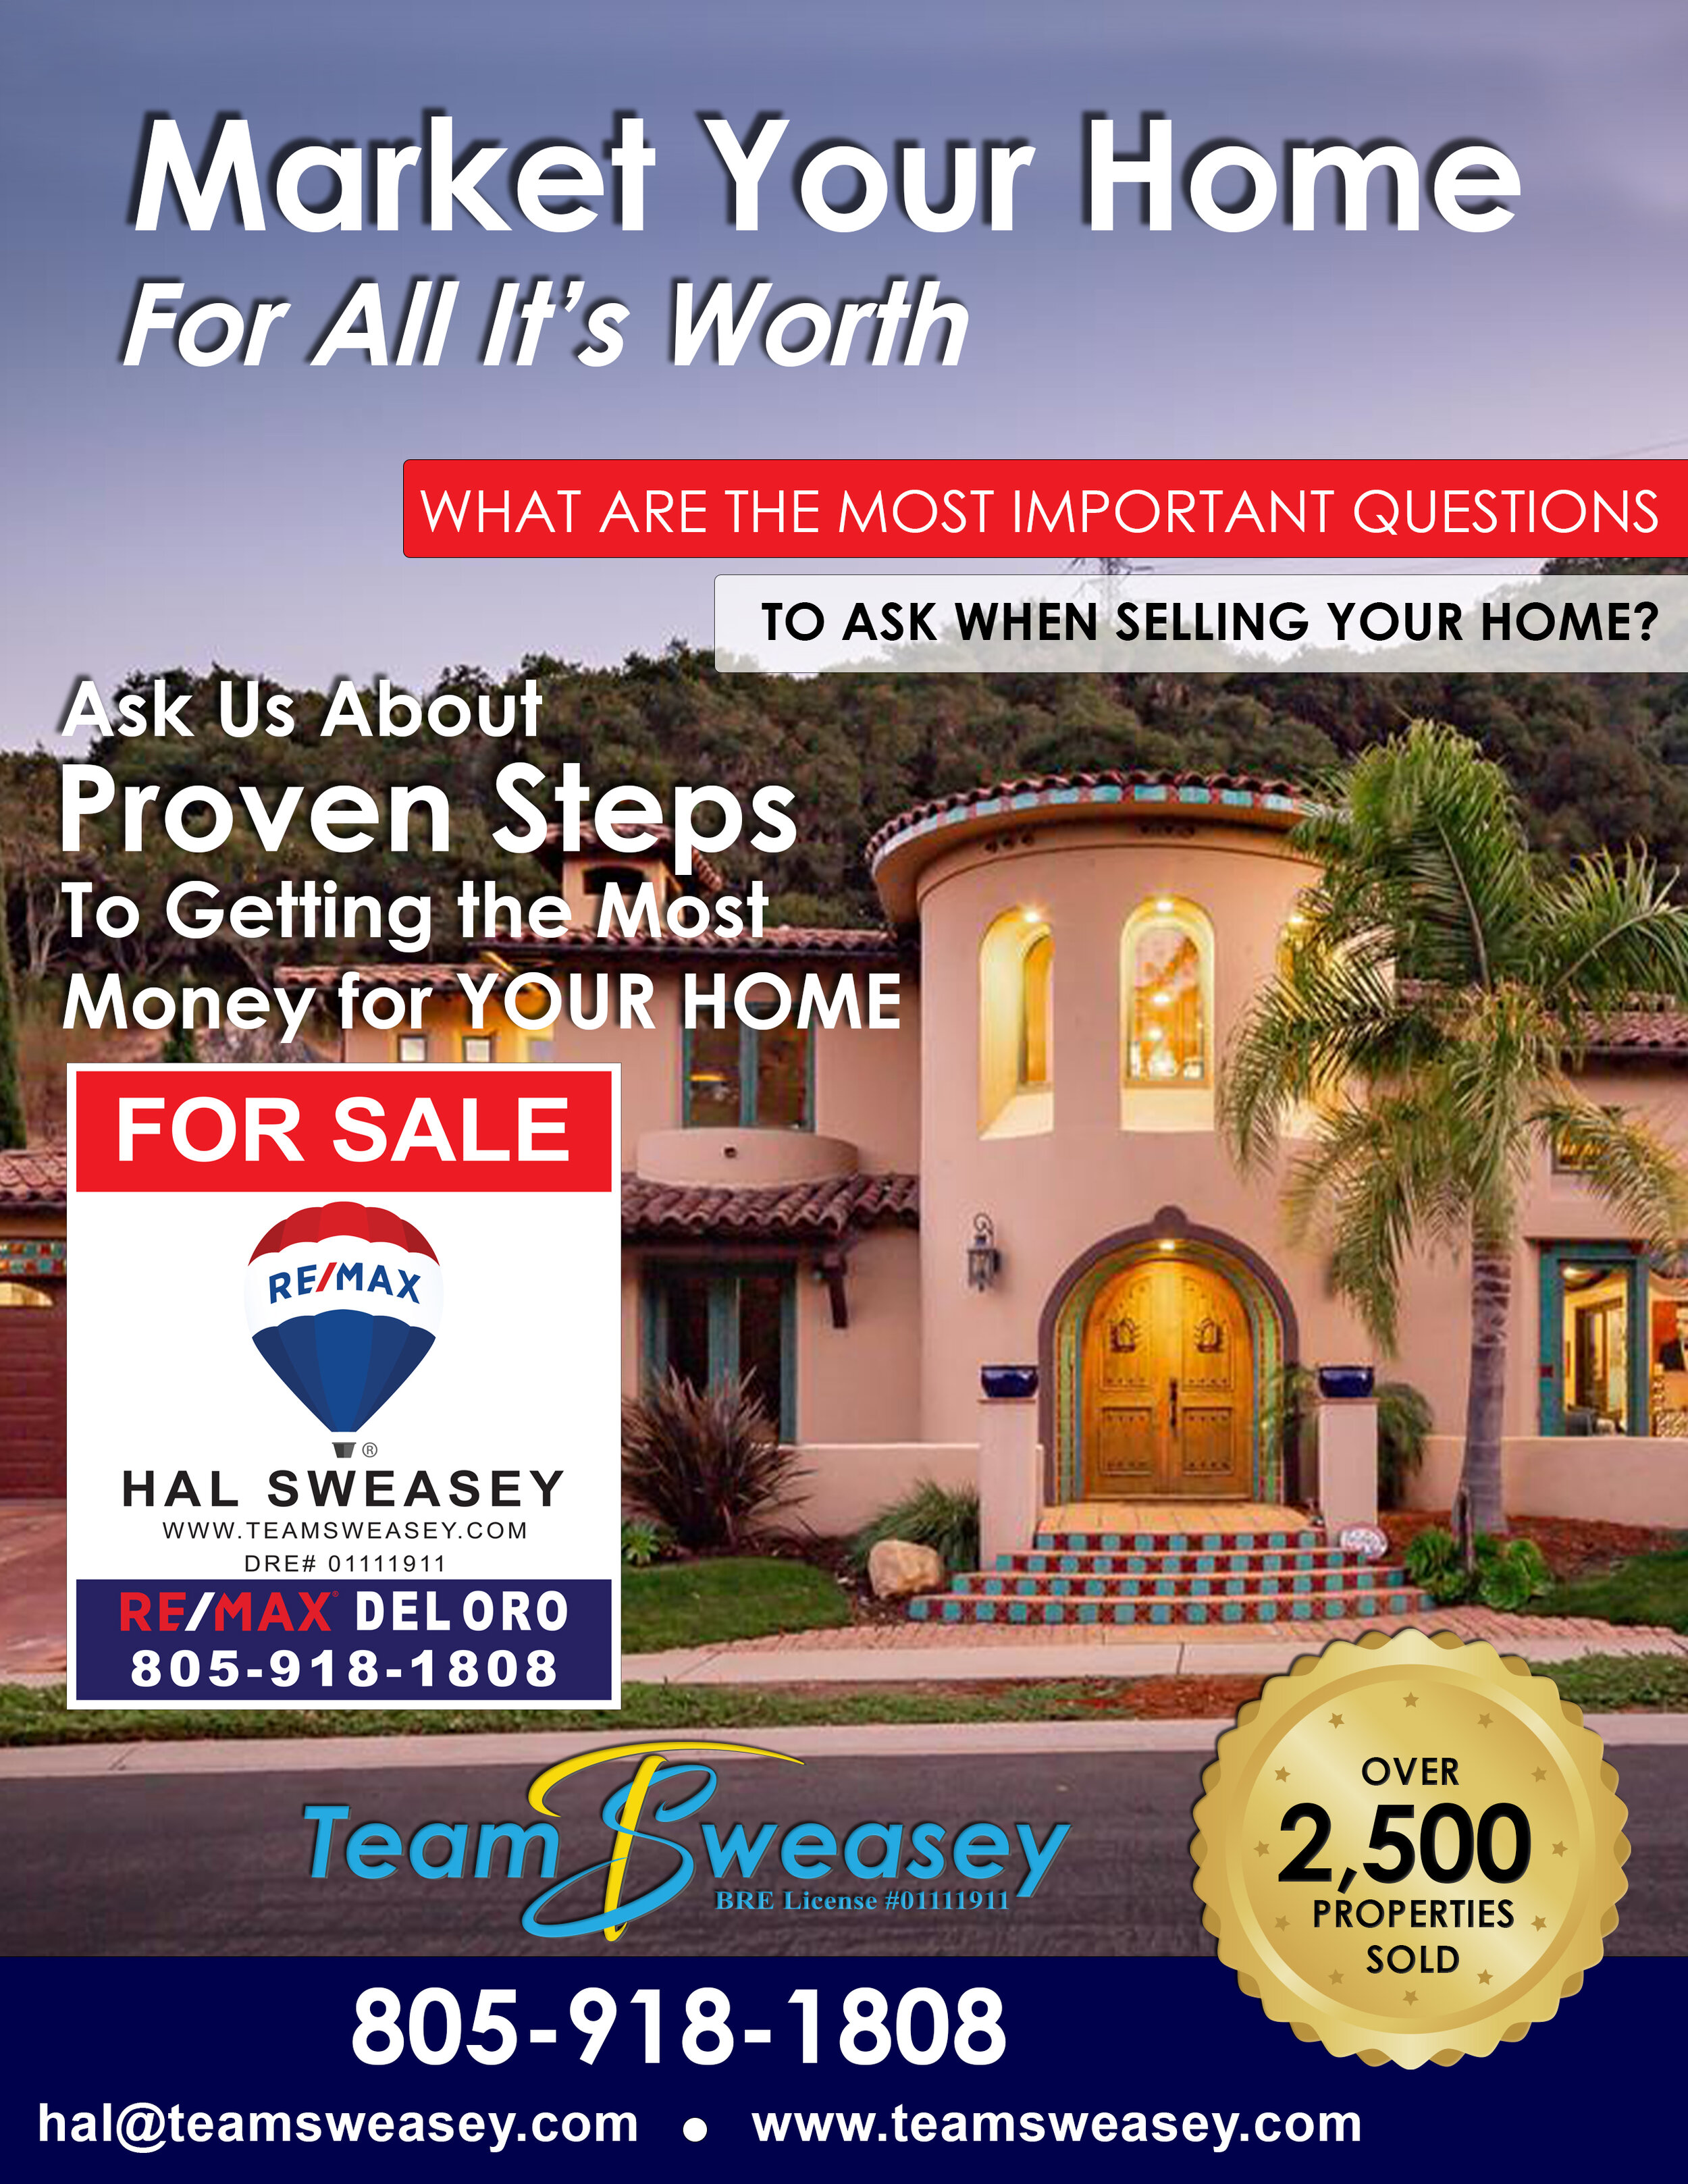 Marketing your home flyer.jpg